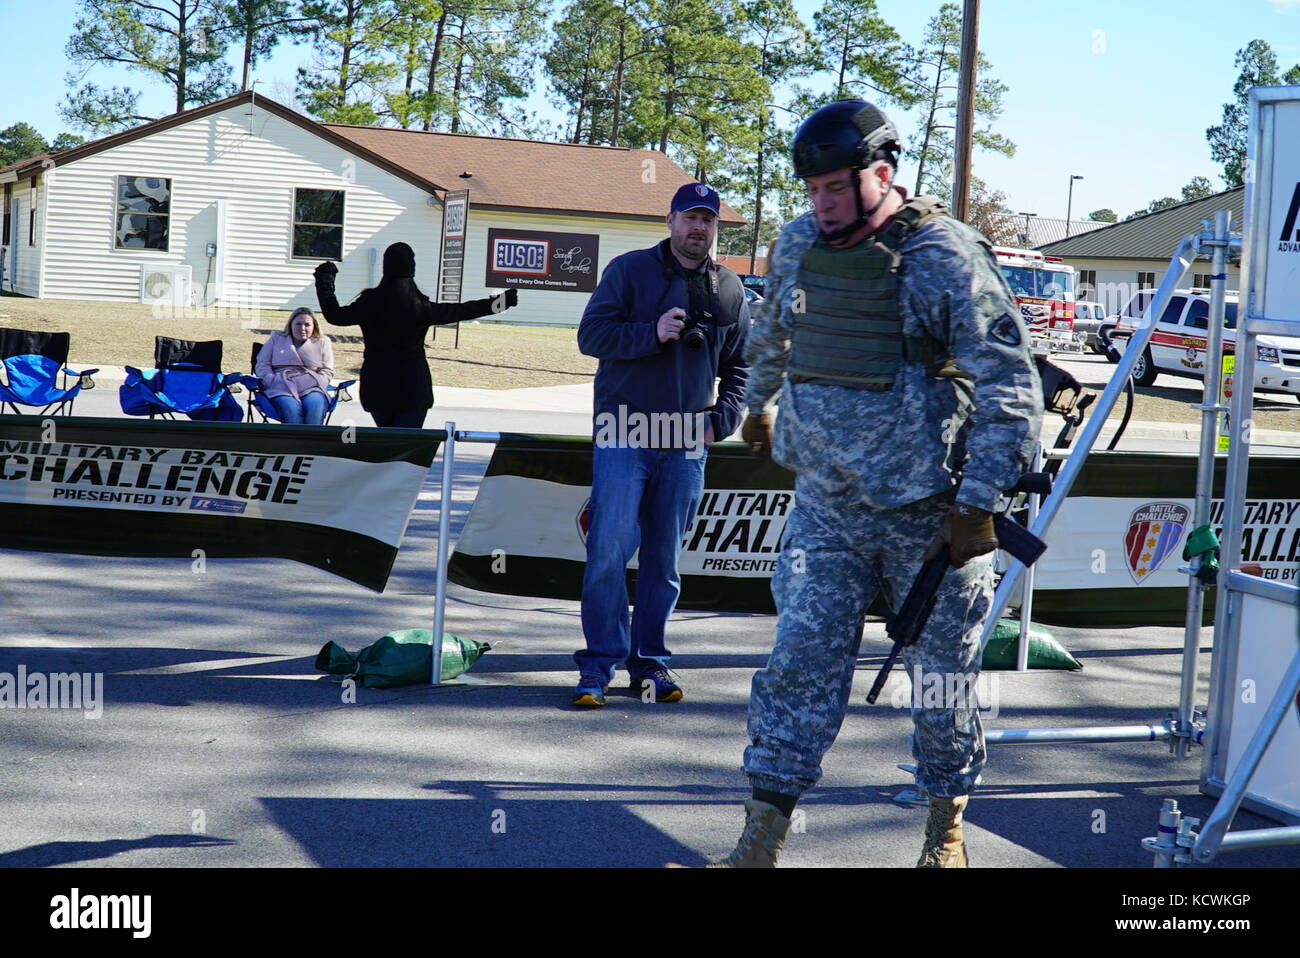 U.S. Army Brig. Gen. R. Van McCarty, Deputy Adjutant General, South Carolina National Guard, competes in the “Battle Challenge” mobile obstacle course at McCrady Training Center in Eastover, South Carolina, Jan. 28, 2017. The Battle Challenge requires participants to perform nine tasks under pressure of time, including a cargo net climb, a knotted rope descent, wall surmount, ammunition resupply, low crawl, gas can carry, marksmanship tasks, and a service member-down rescue. (U.S. Army National Guard photo by Capt. Brian Hare) Stock Photo